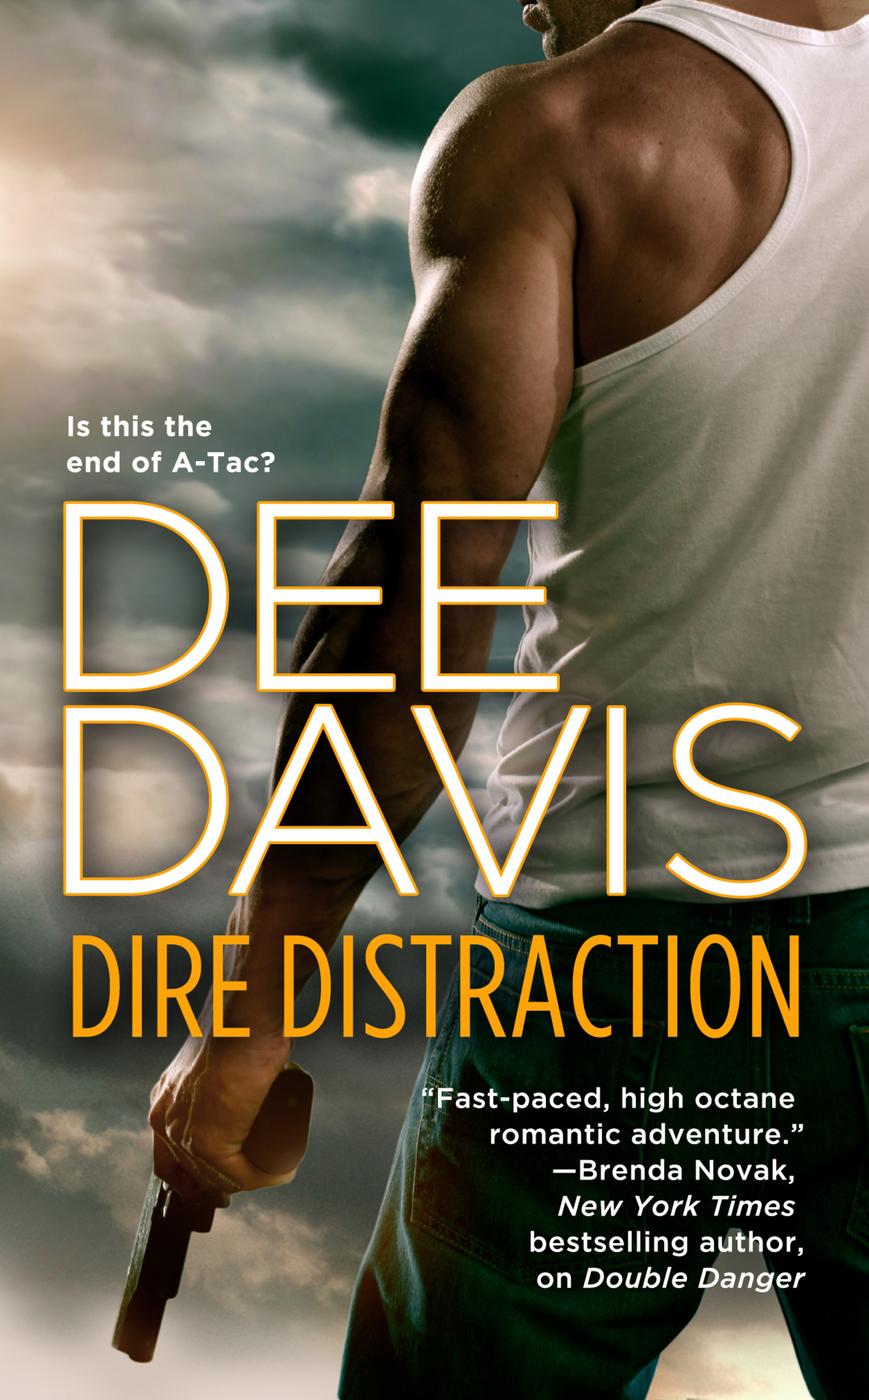 Dire Distraction (2013)